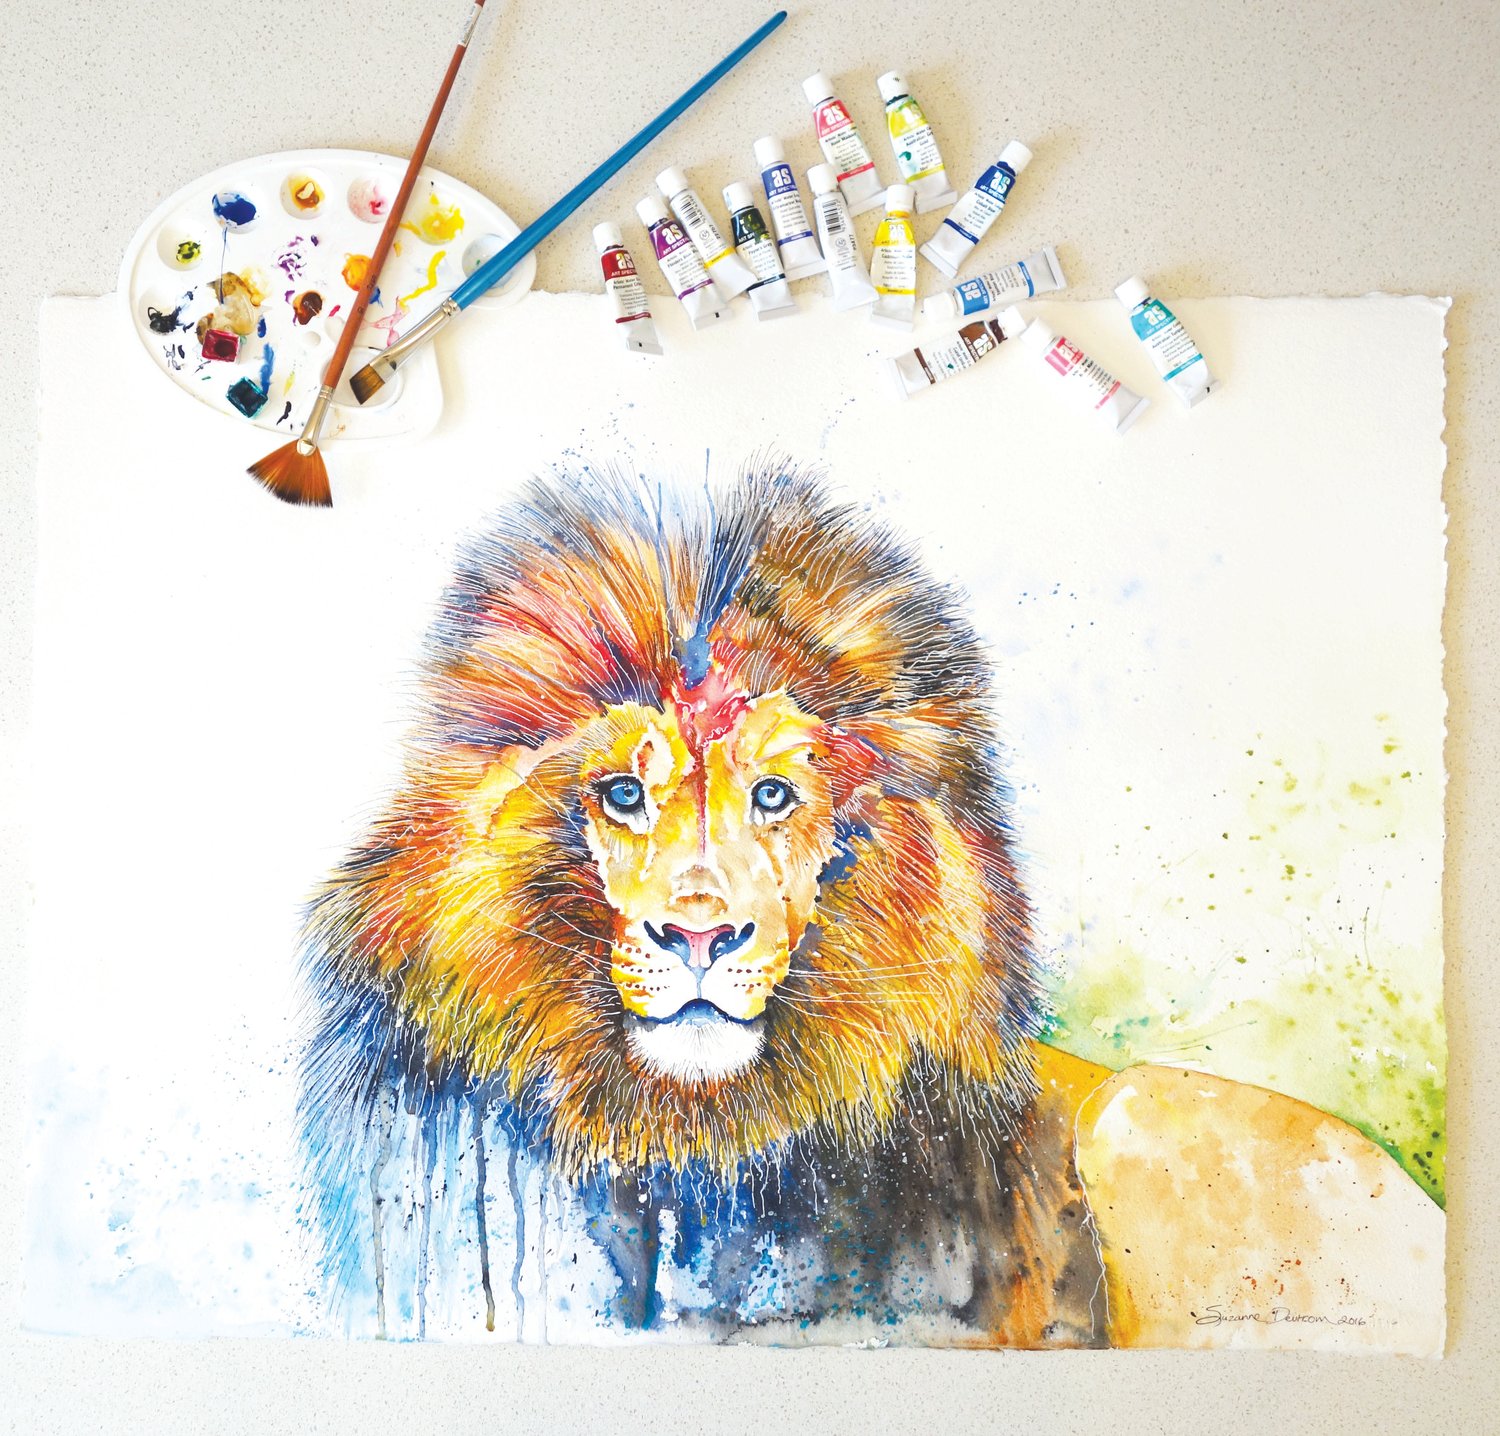 Image of Frey the Lion - FREE SHIPPING only within Australia